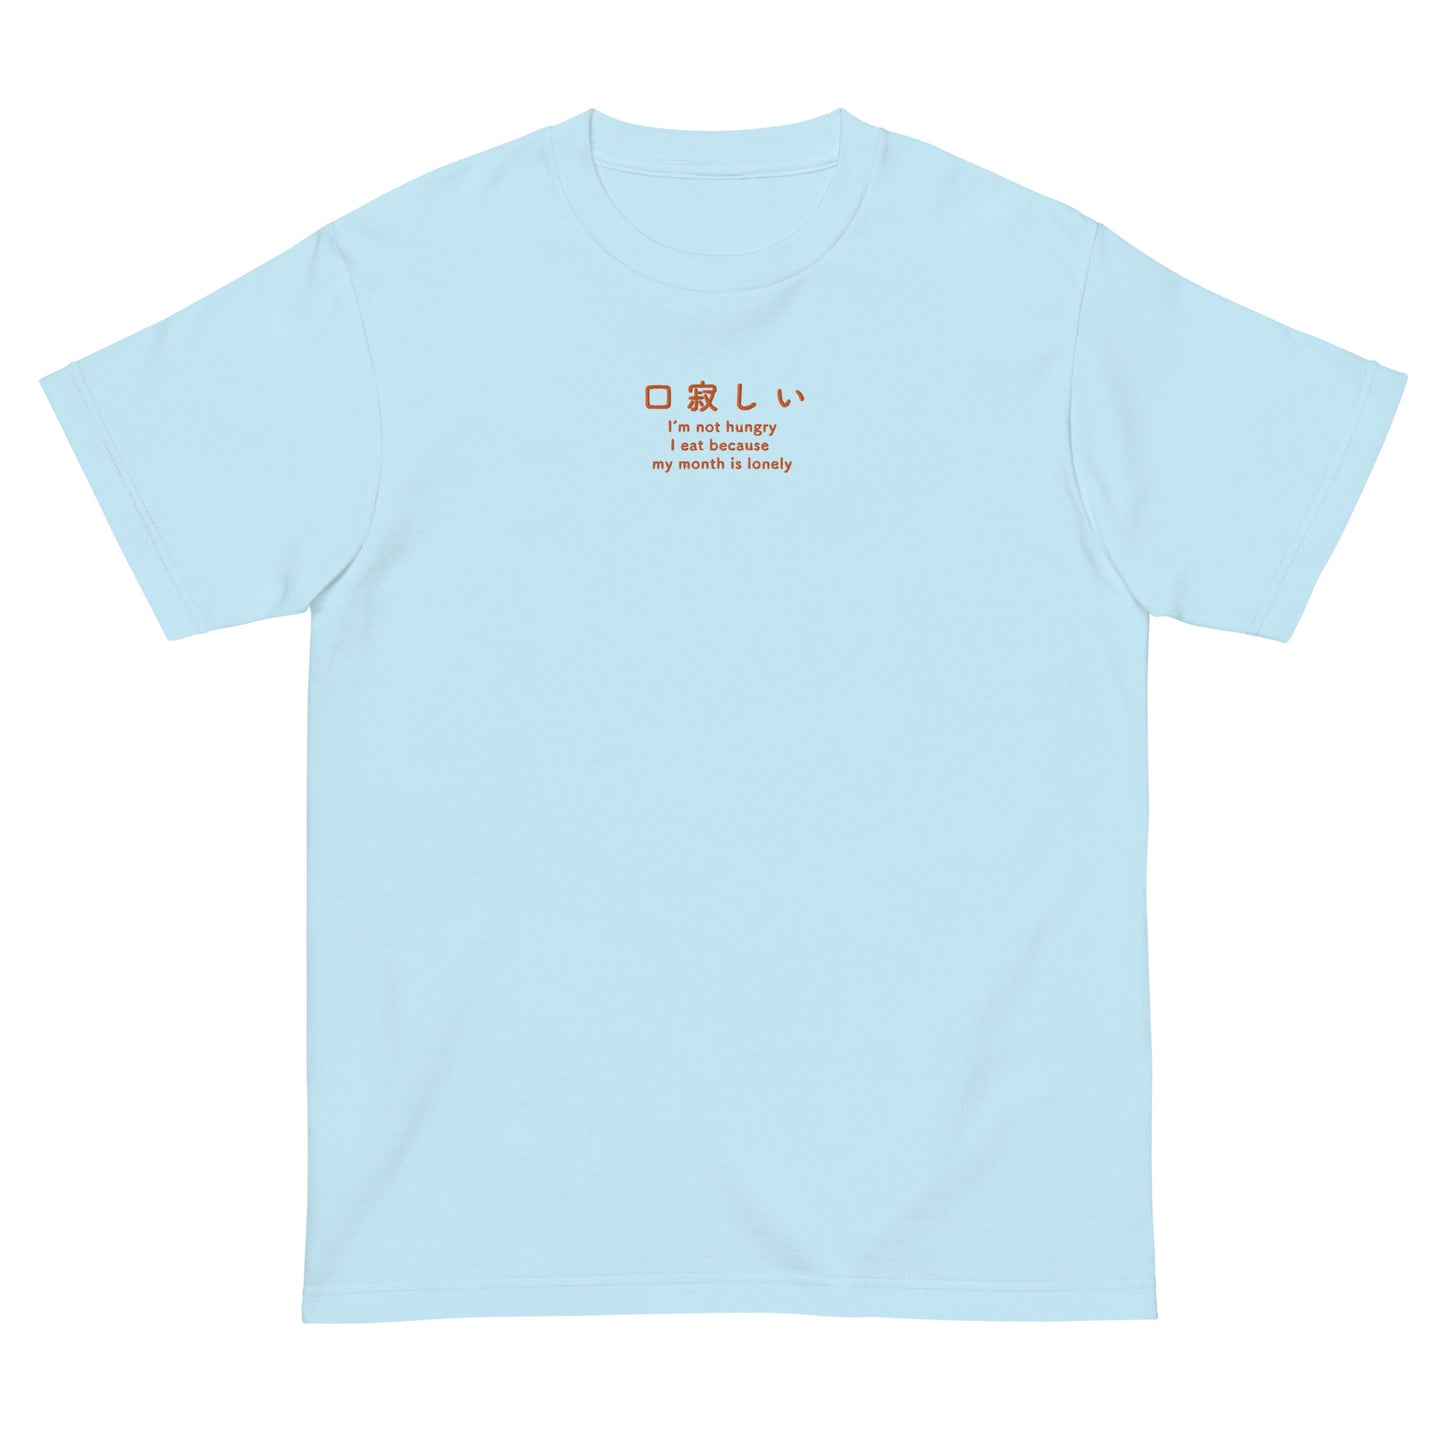 Light Blue High Quality Tee - Front Design with an Orange Embroidery "kuchisabishi" in Japanese and English